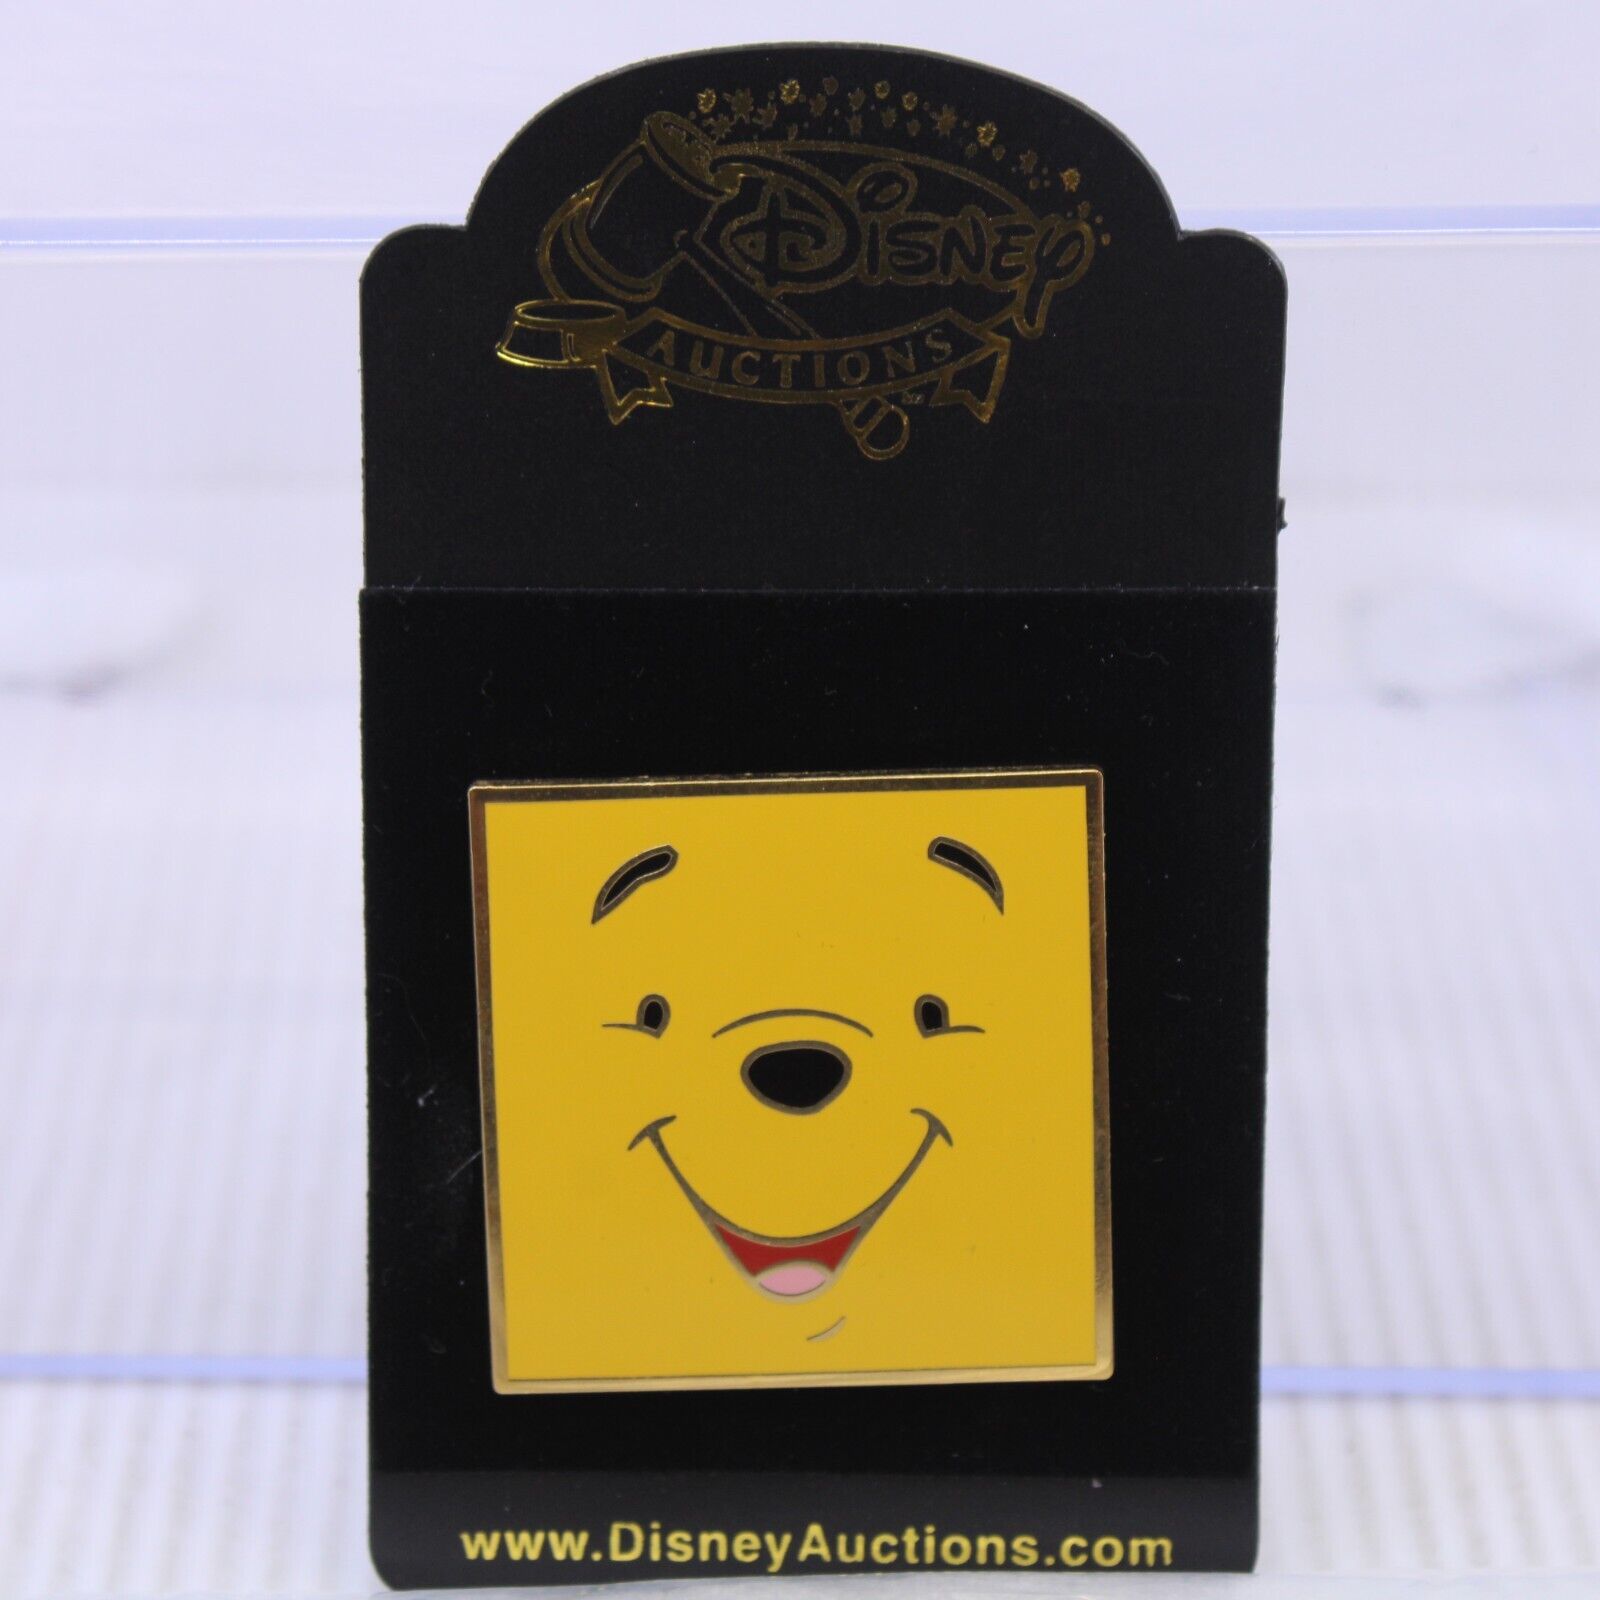 B5 Disney Auctions LE 500 Pin Winnie the Pooh Face Field Square